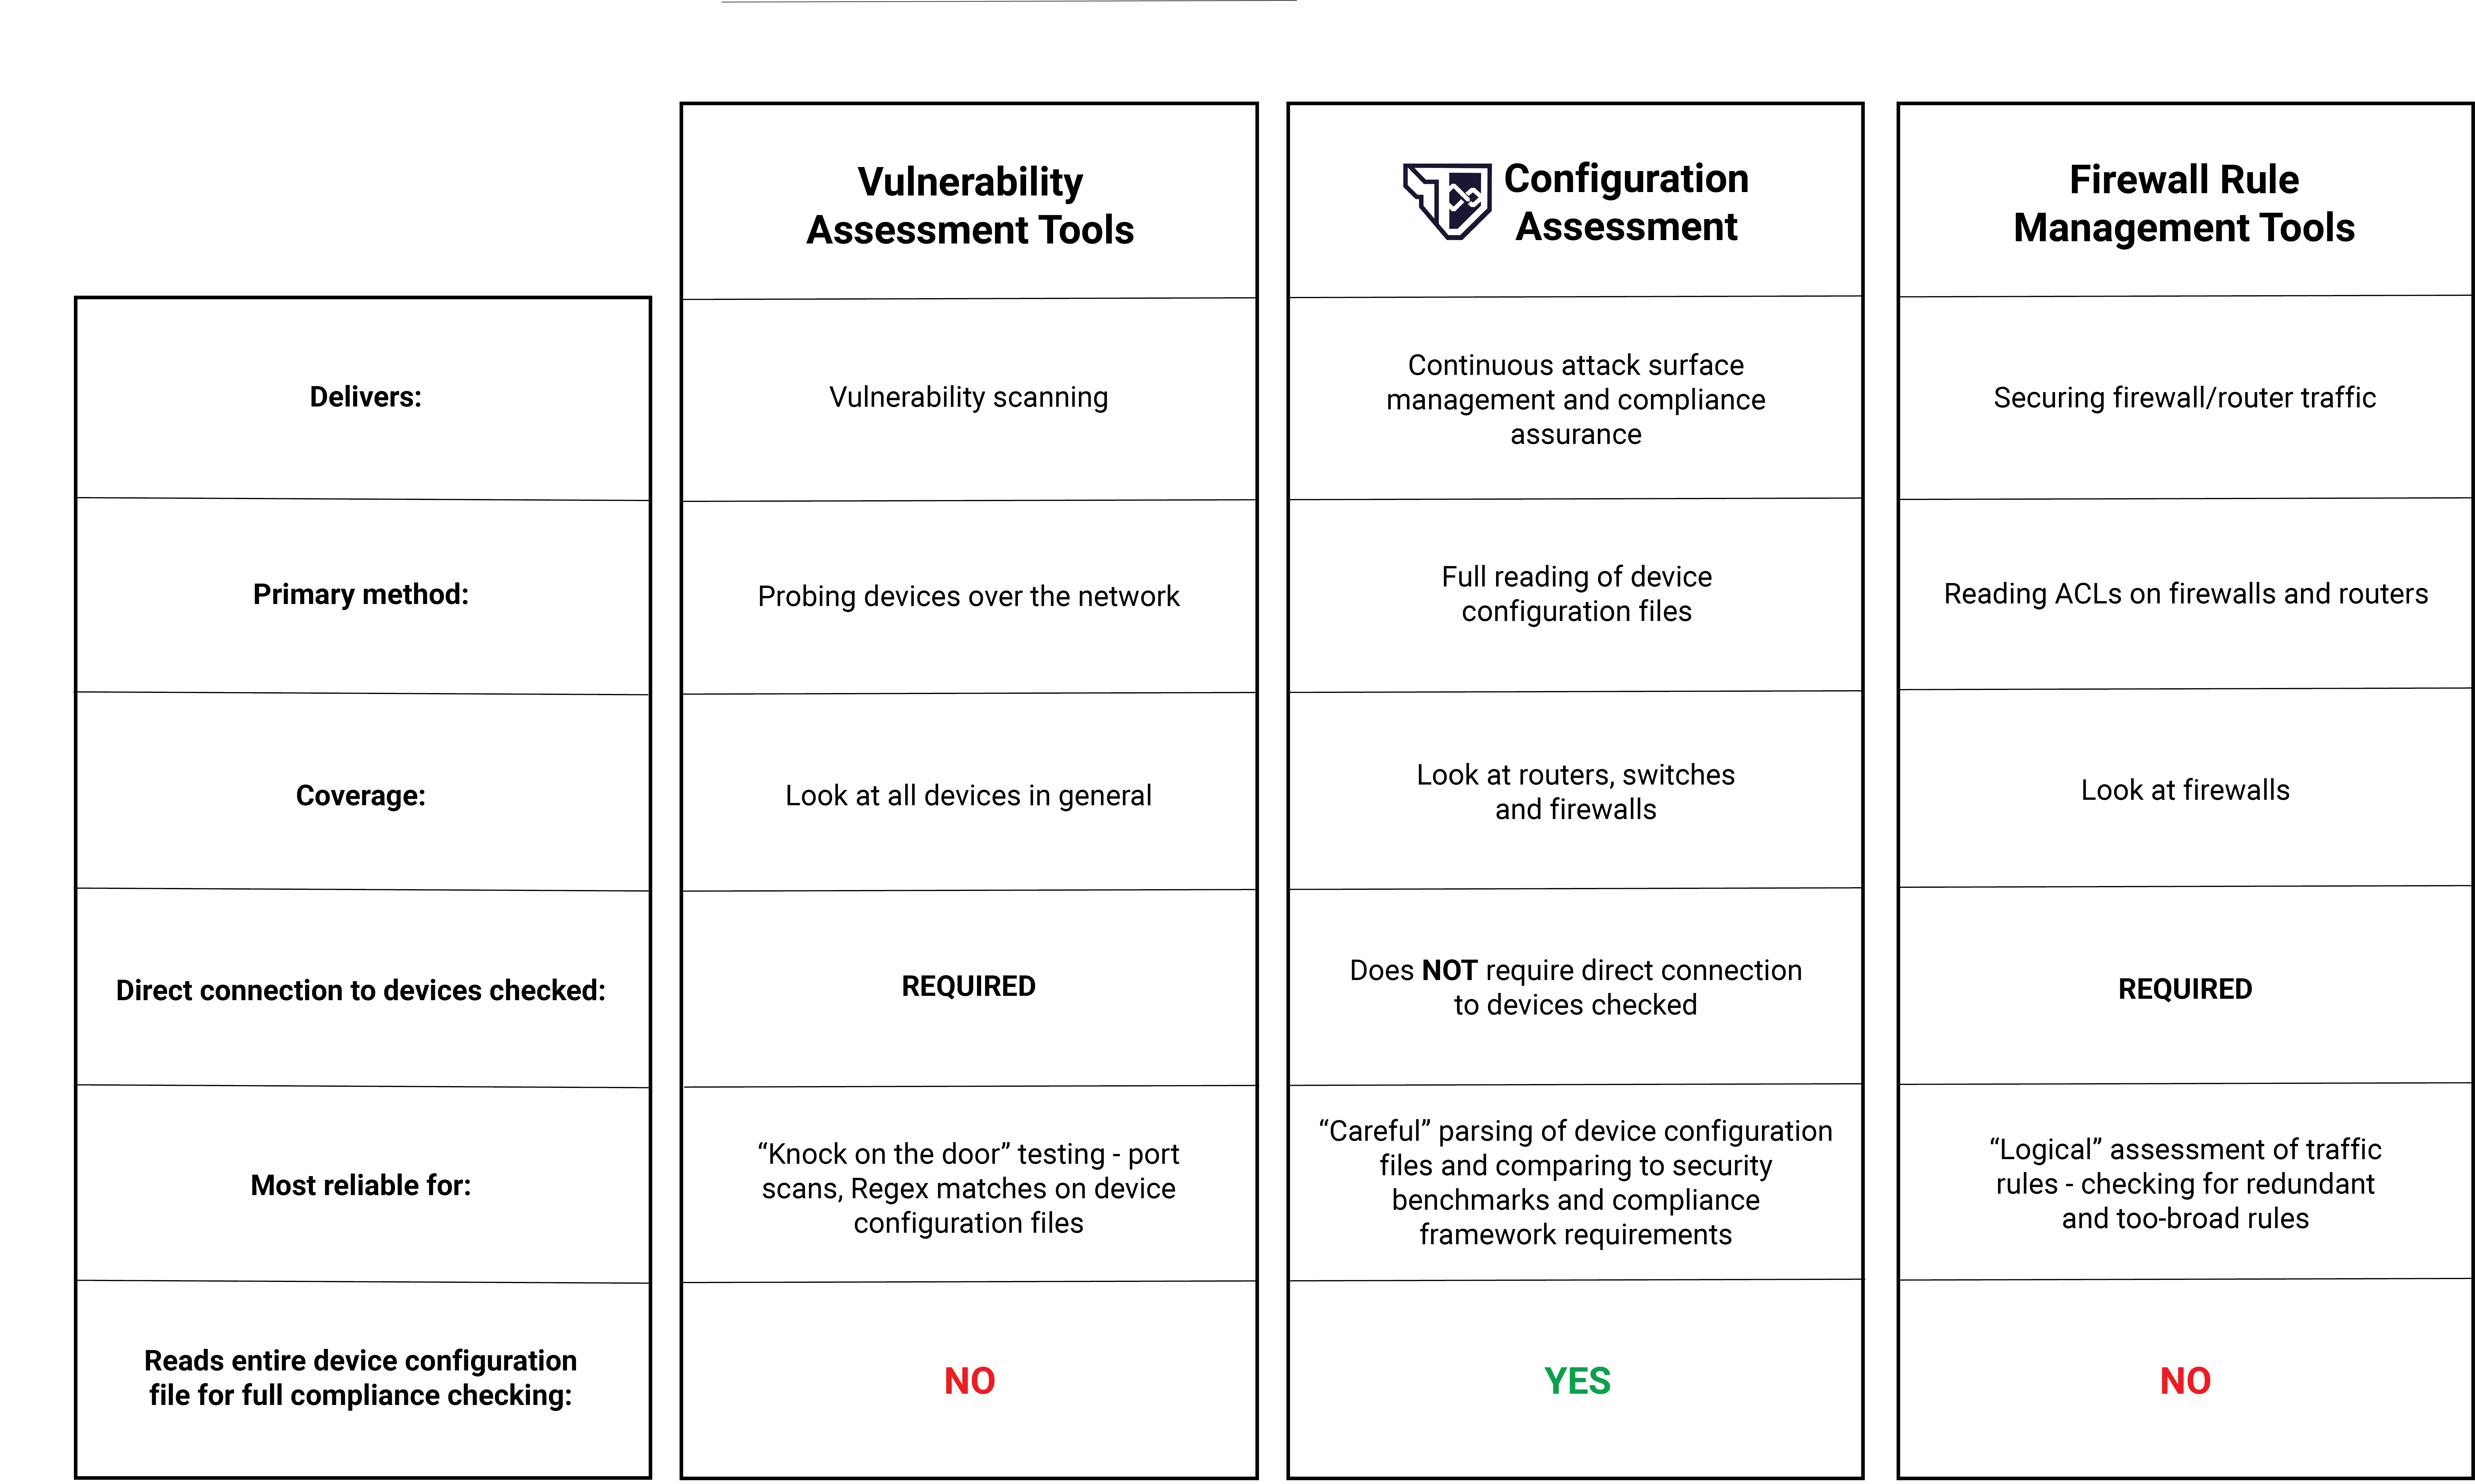 Nipper configuration accuracy table detailing vulnerability assessment, config assessment and firewall management tools.